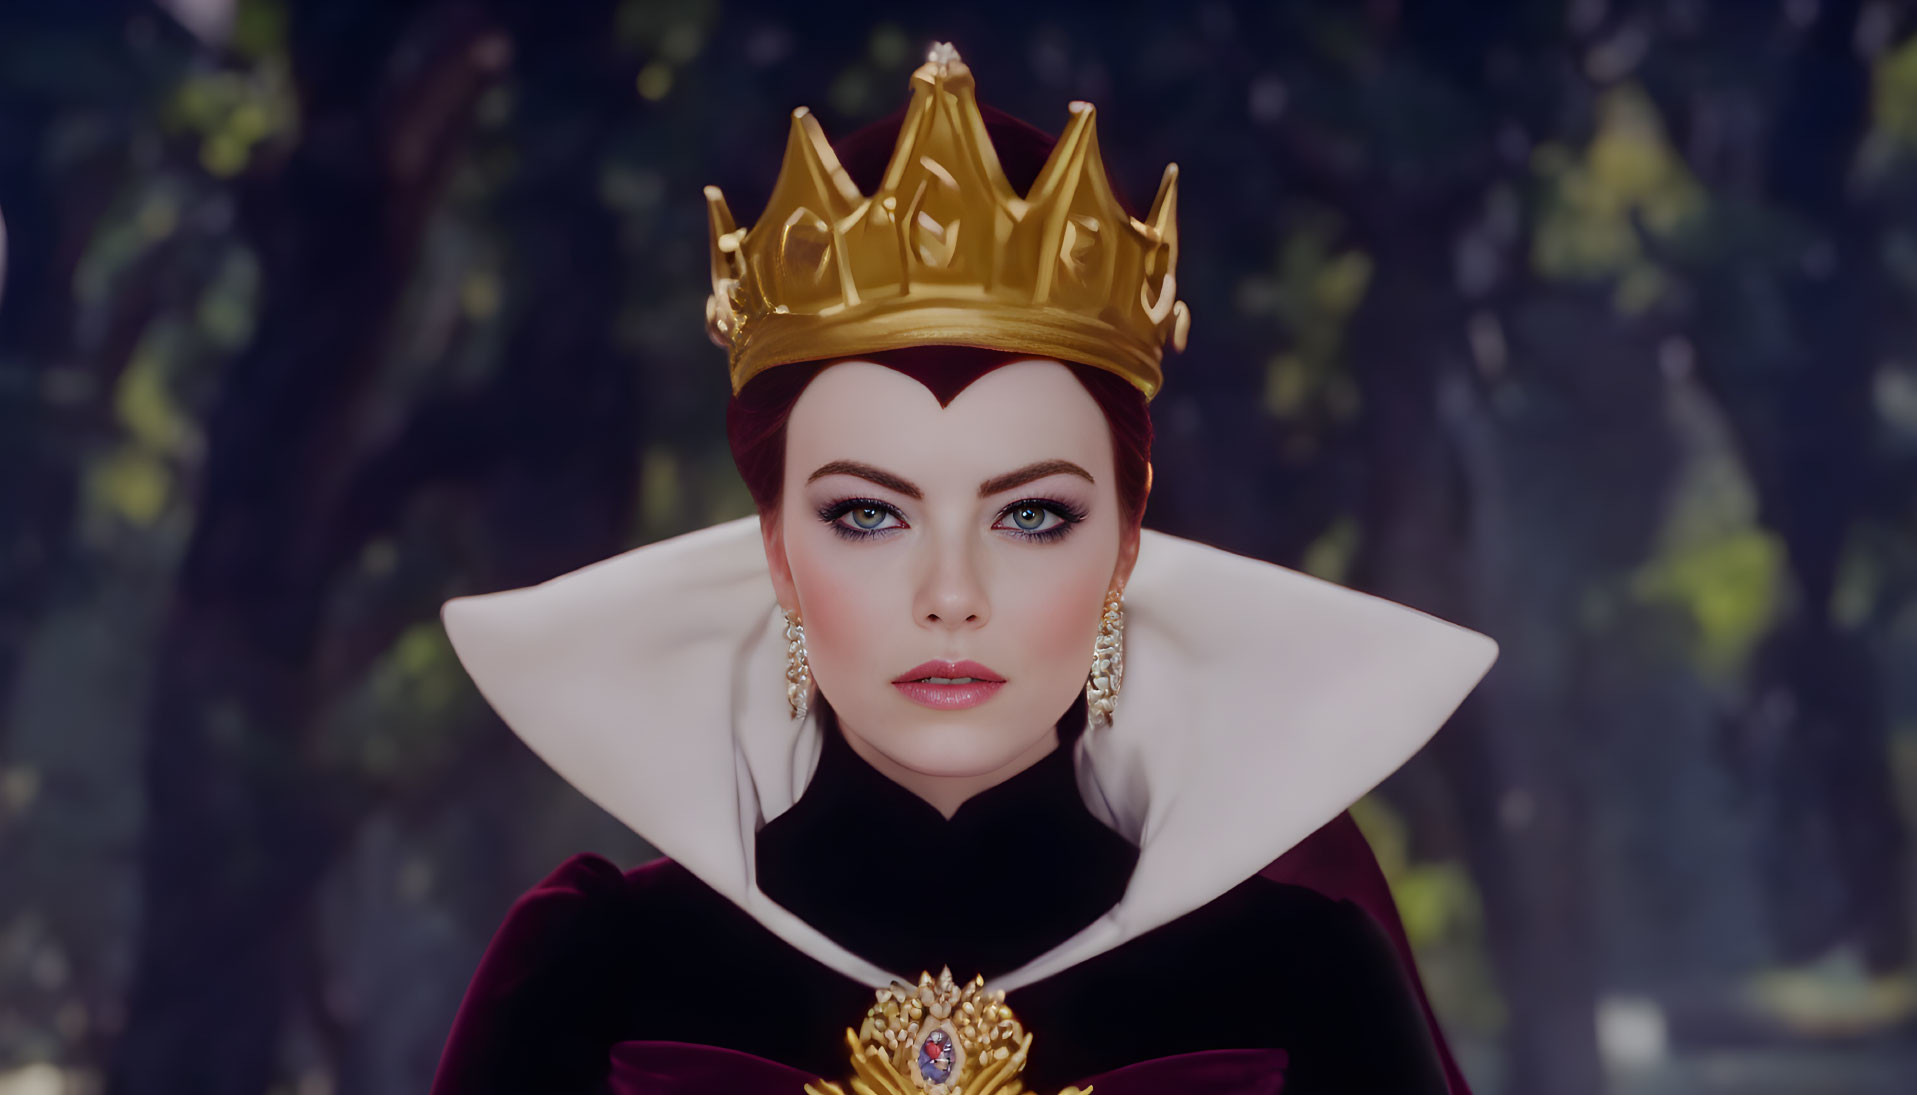 ANDRE´S ART EMMA STONE AS PRINCESS EVIL QUEEN